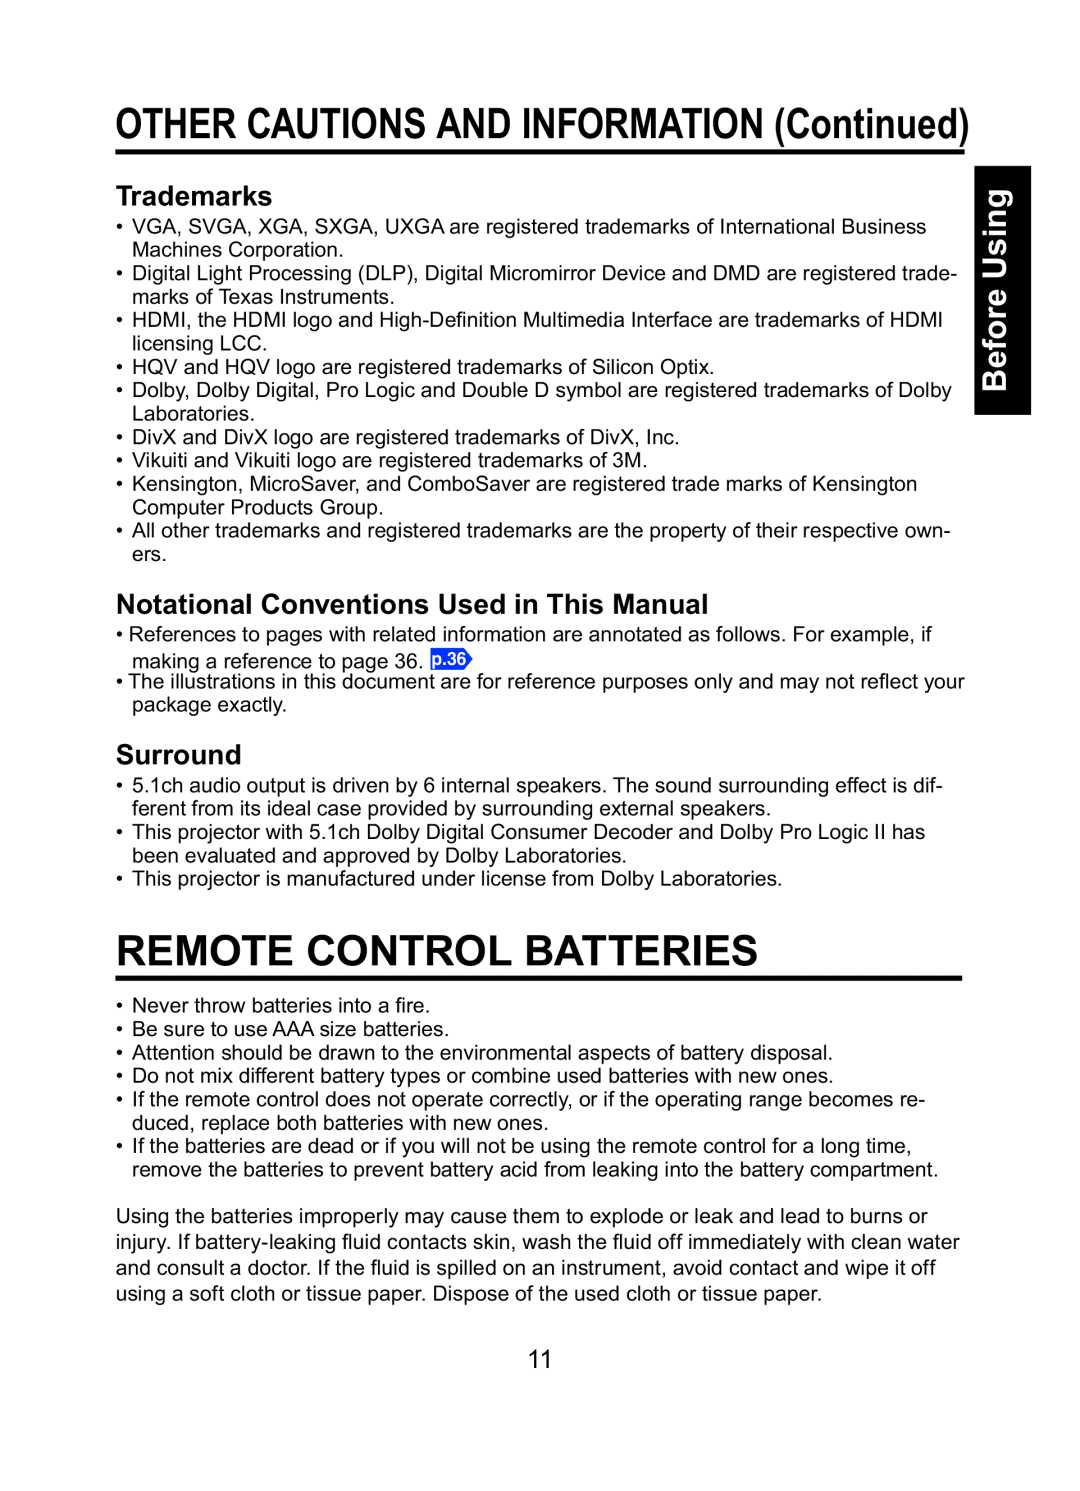 Toshiba TDP-ET10 Remote Control Batteries, OTHER CAUTIONS AND INFORMATION Continued, Trademarks, Surround, Before Using 